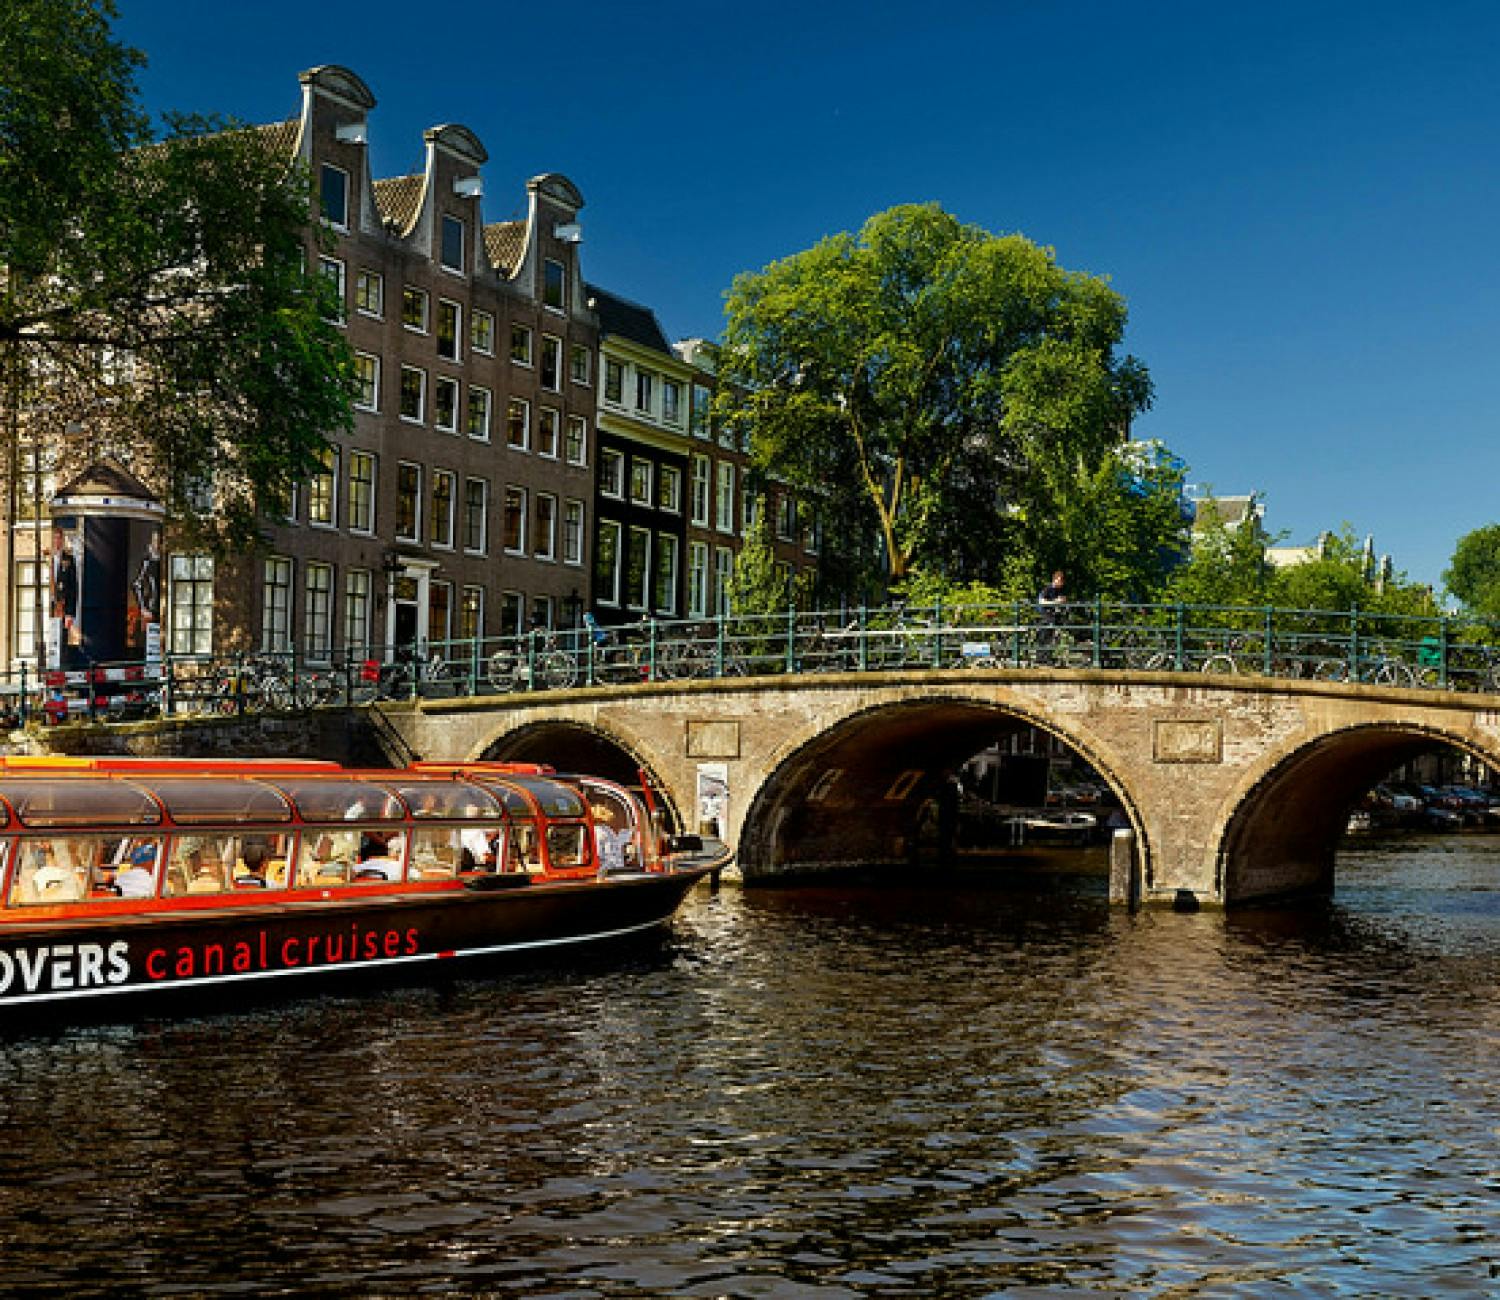 Keukenhof and flowerfields tour with free Amsterdam canal cruise-2